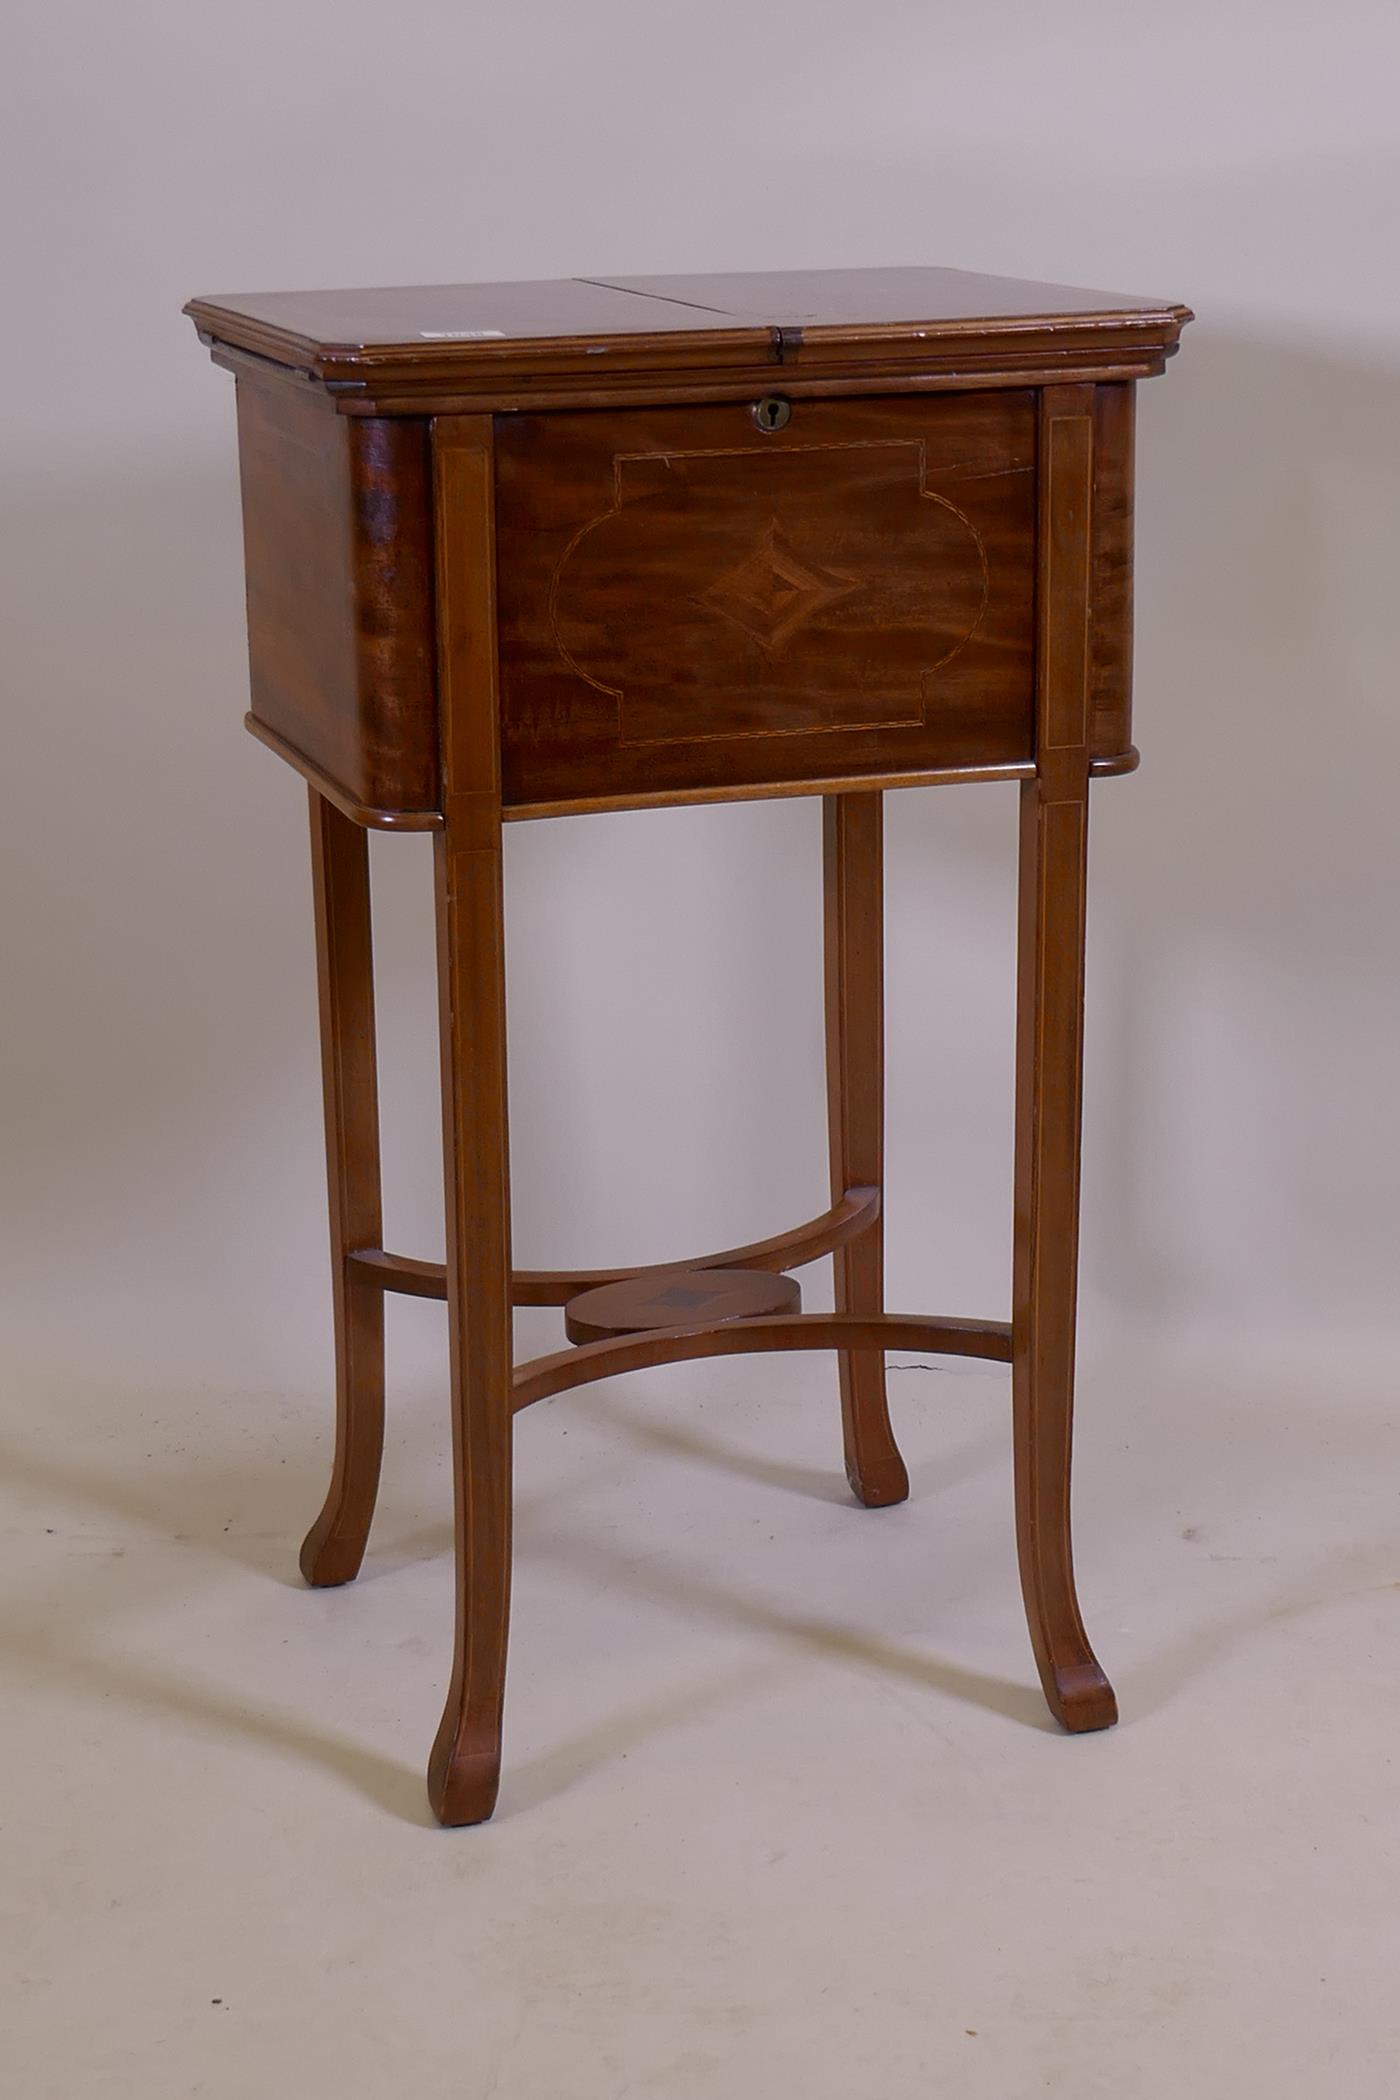 An Edwardian inlaid mahogany work table, the fold over top opening to reveal a fitted interior